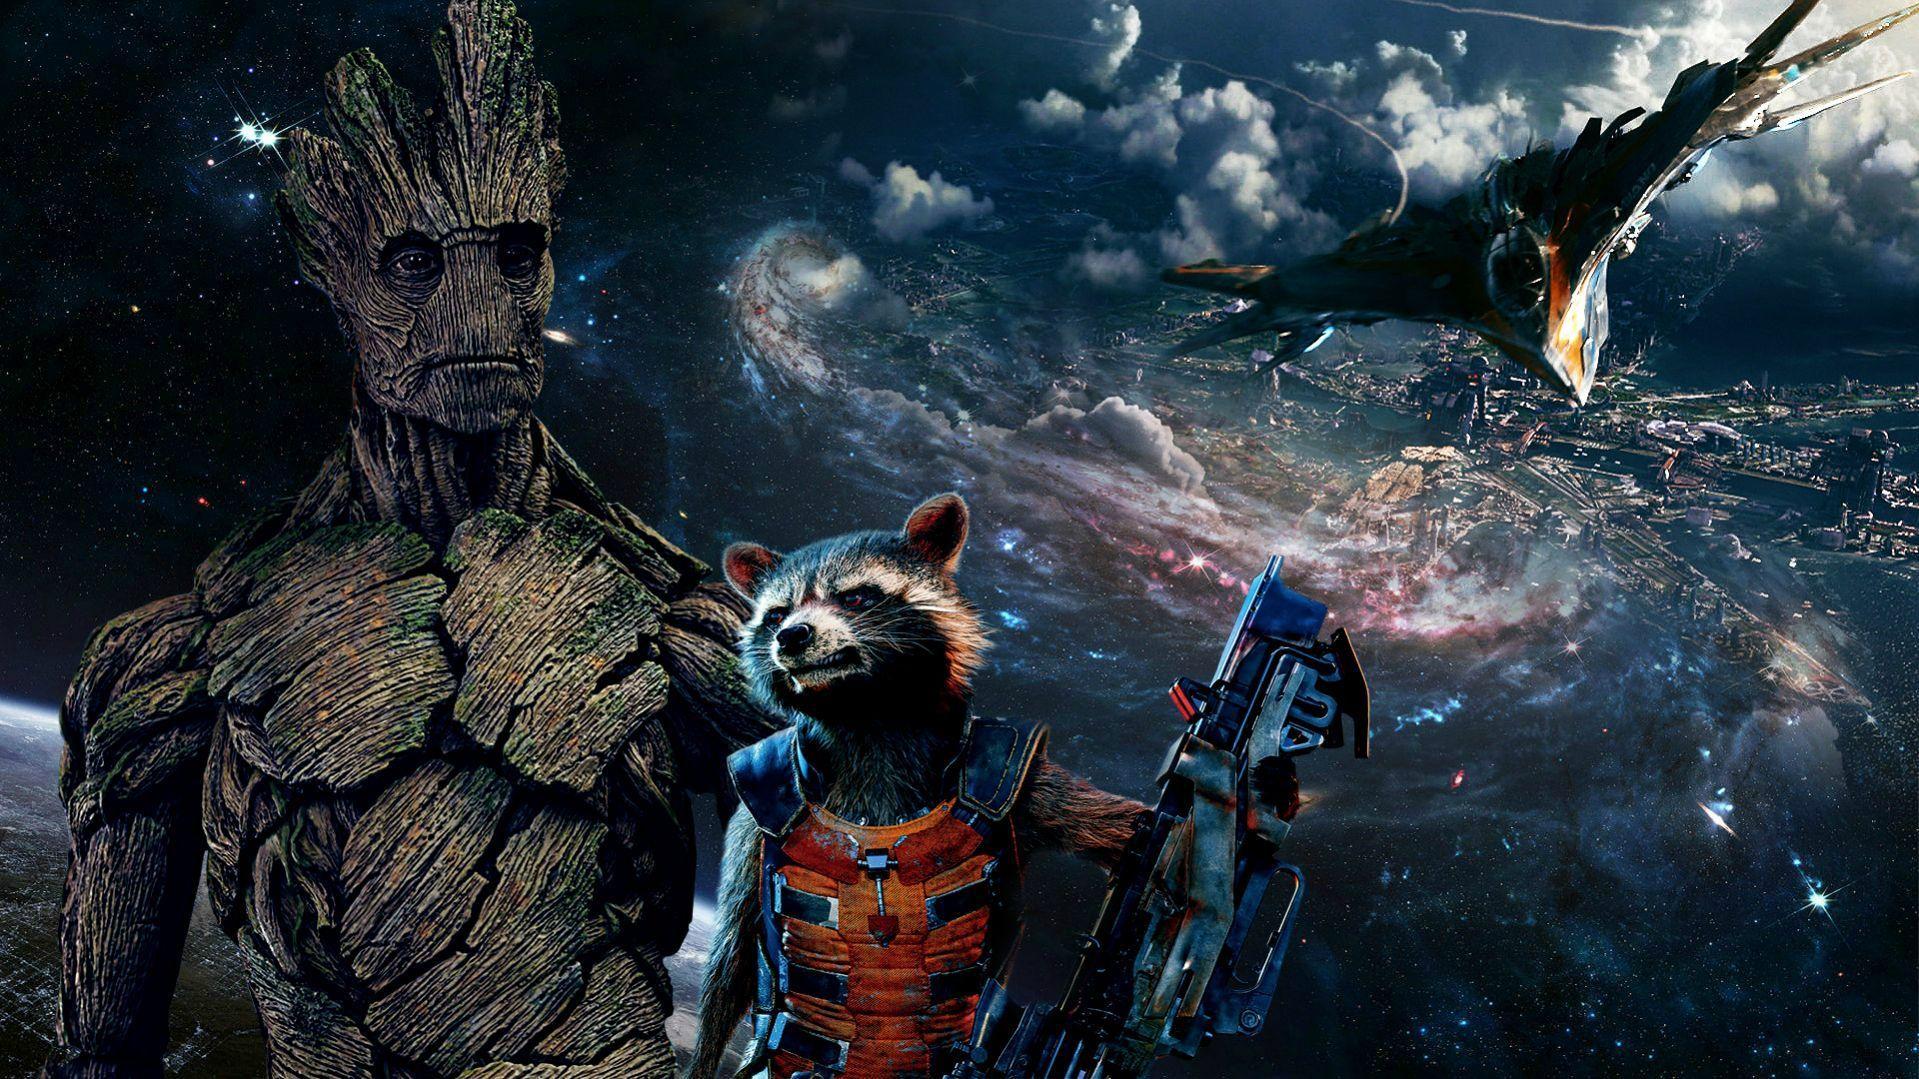 Groot and Rocket wallpaper [1920x1080]. Groot and rocket wallpaper, Marvel cinematic universe movies, Wallpaper 1920x1080